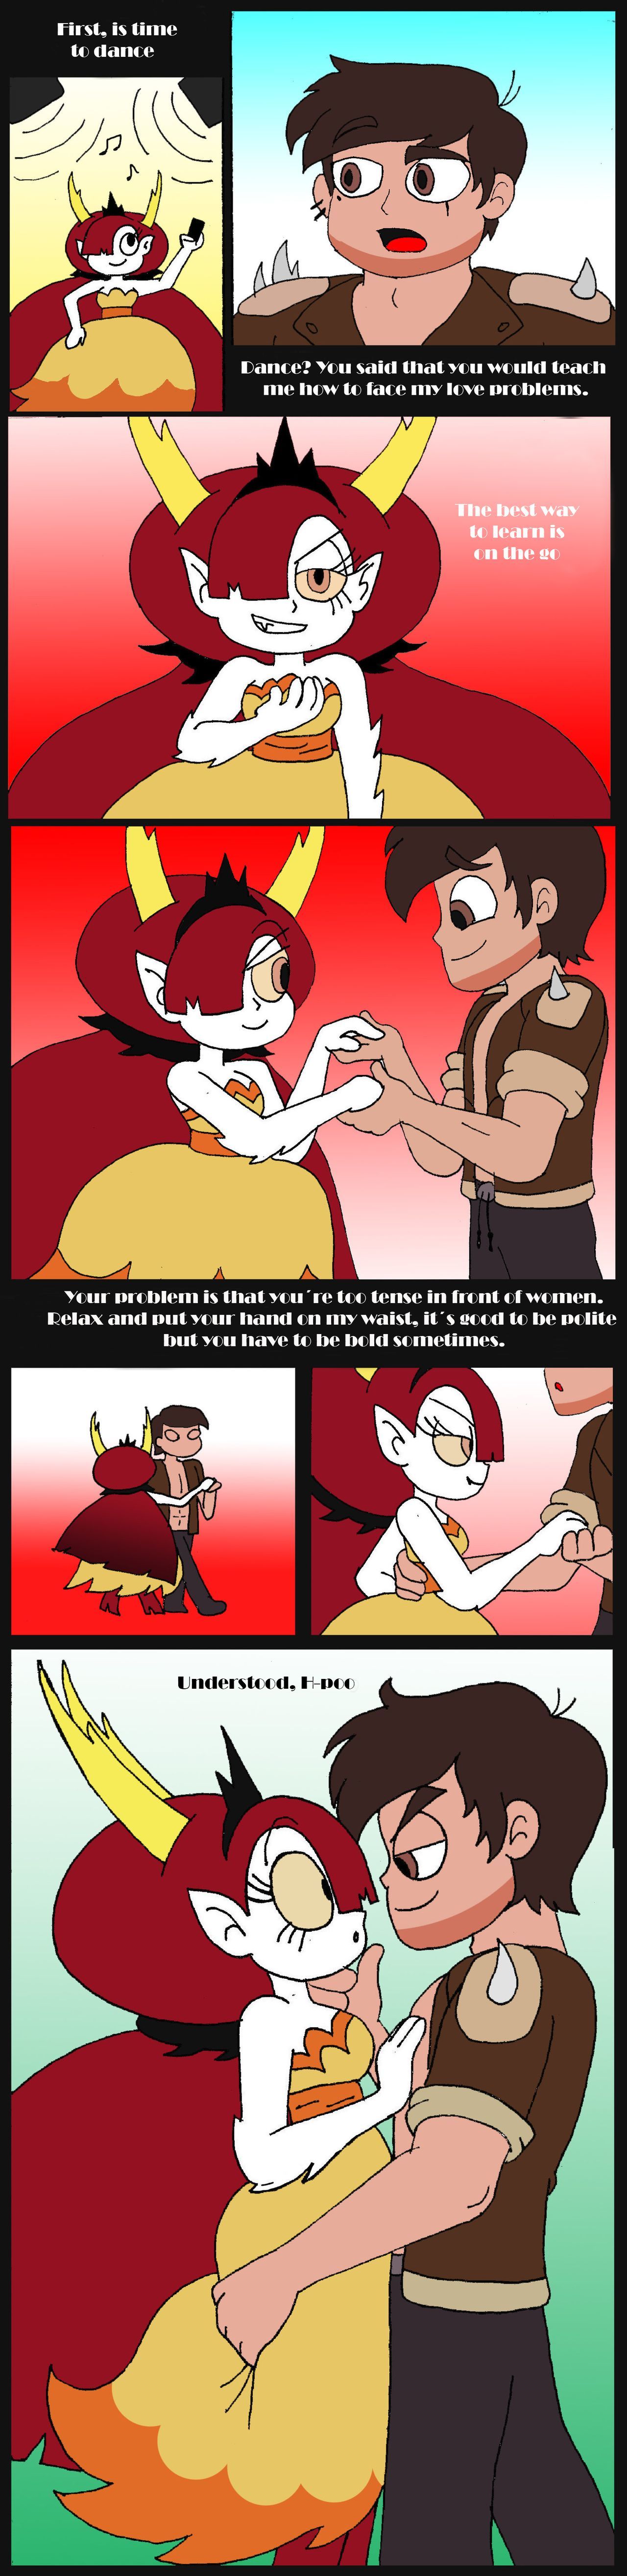 Playing with Fire (Star vs. the Forces of Evil) by Ferozyraptor page 12